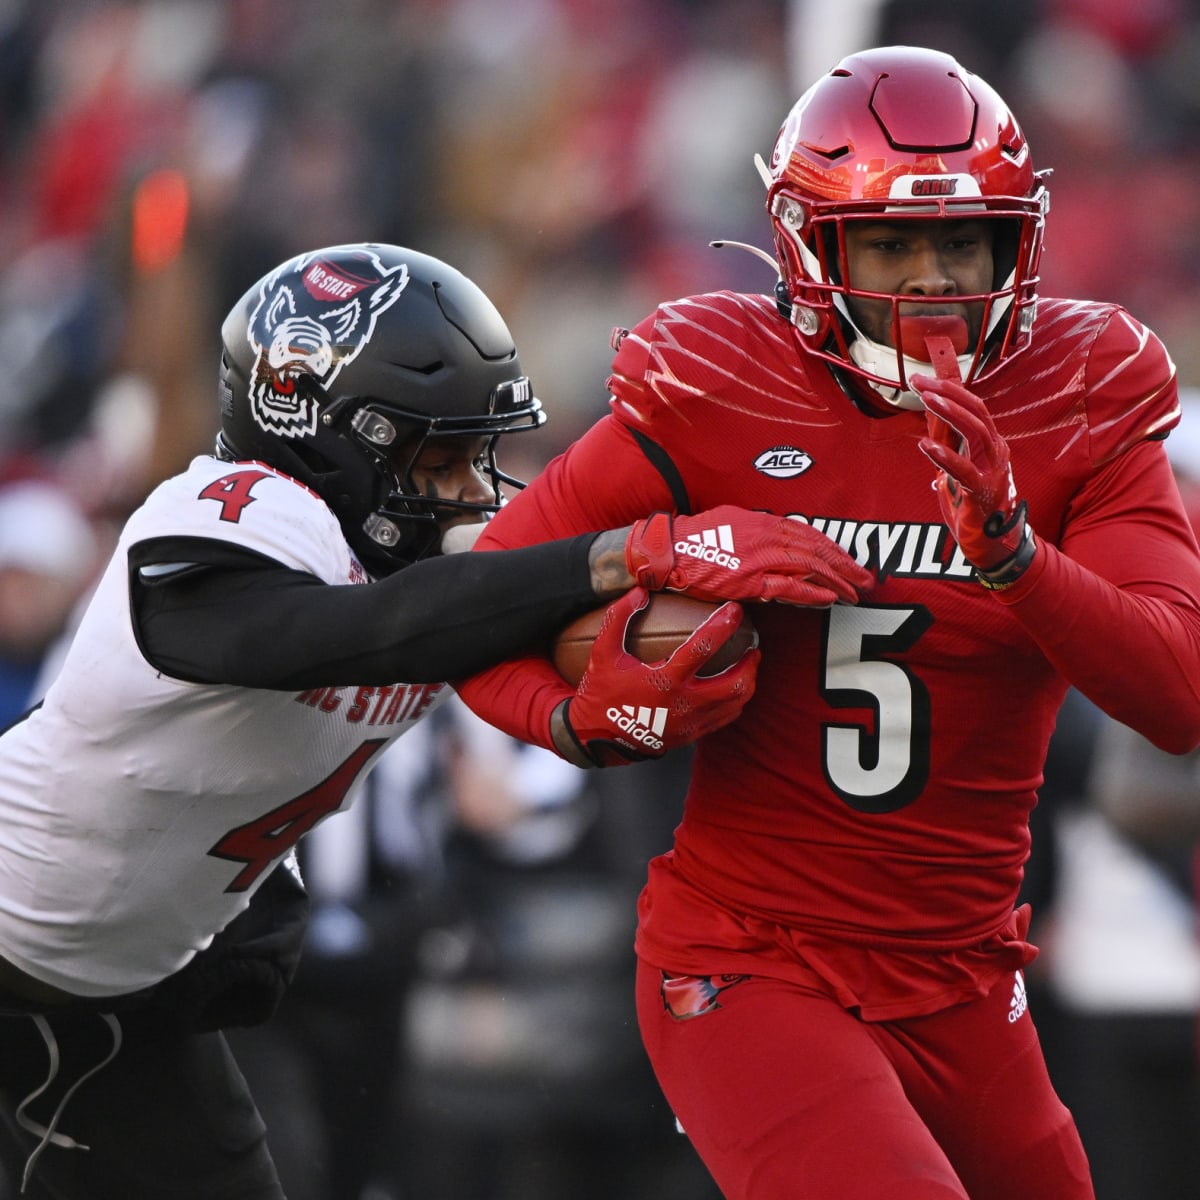 Louisville football ranking? UofL in latest AP Top 25 and coaches poll